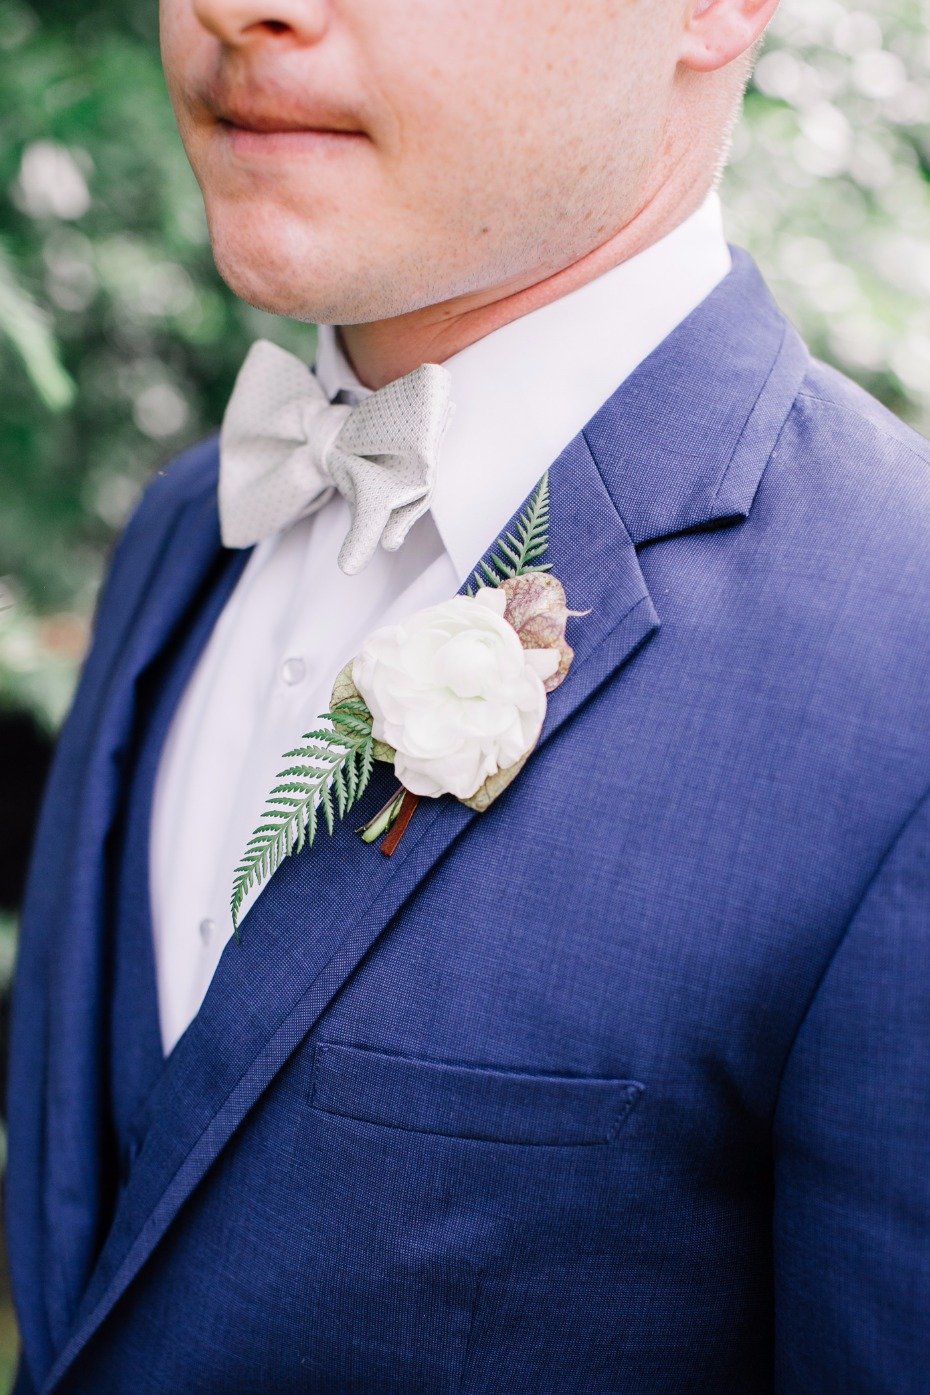 Grooms boutonniere